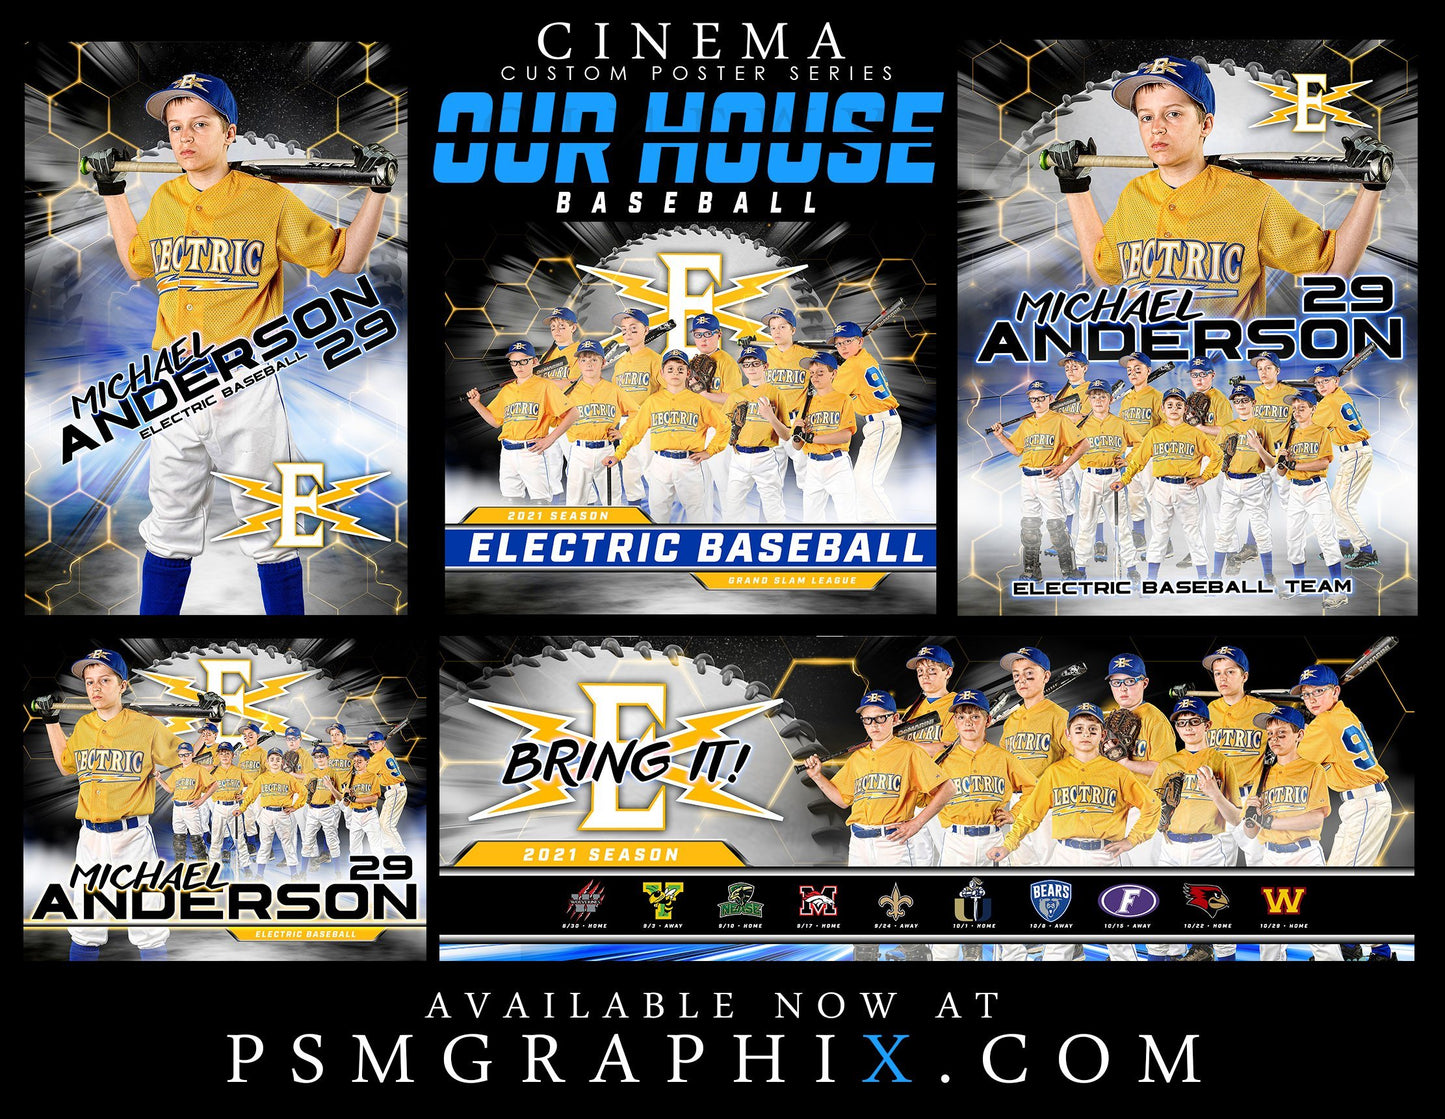 Our House - Baseball - FULL Collection -  Cinema Series - Game Time Collection-Photoshop Template - PSMGraphix